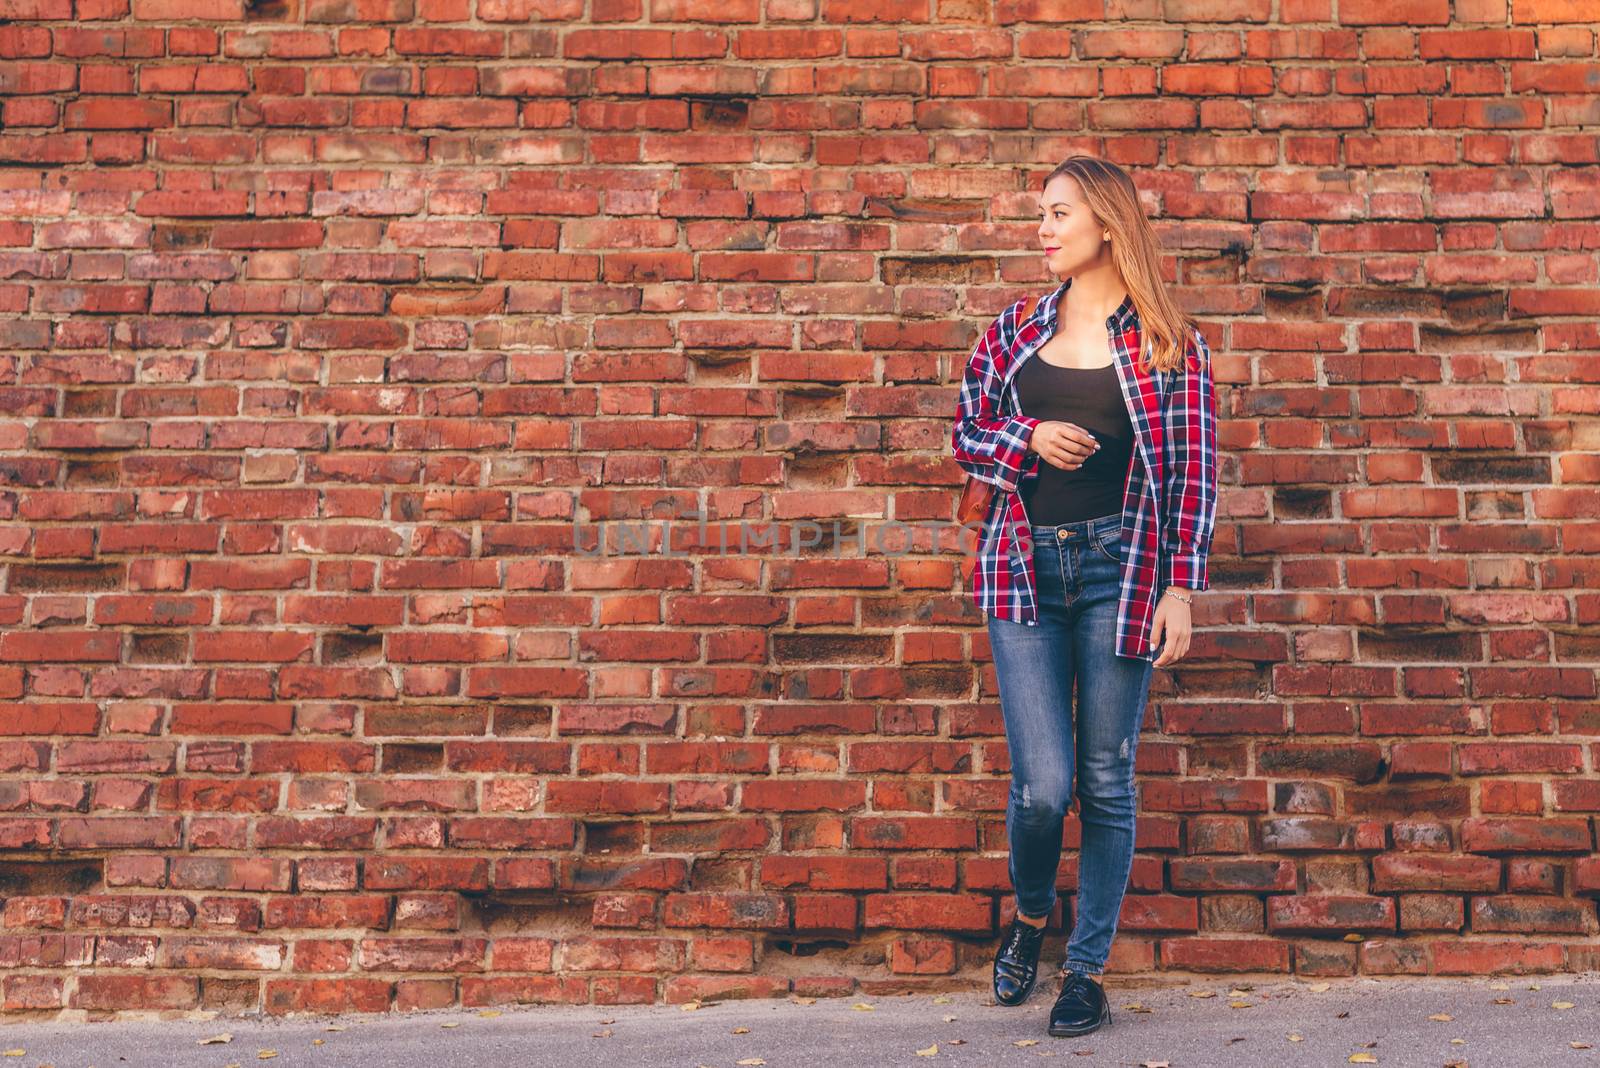 Portrait of young woman in checkered shirt and blue jeans standing against red brick wall